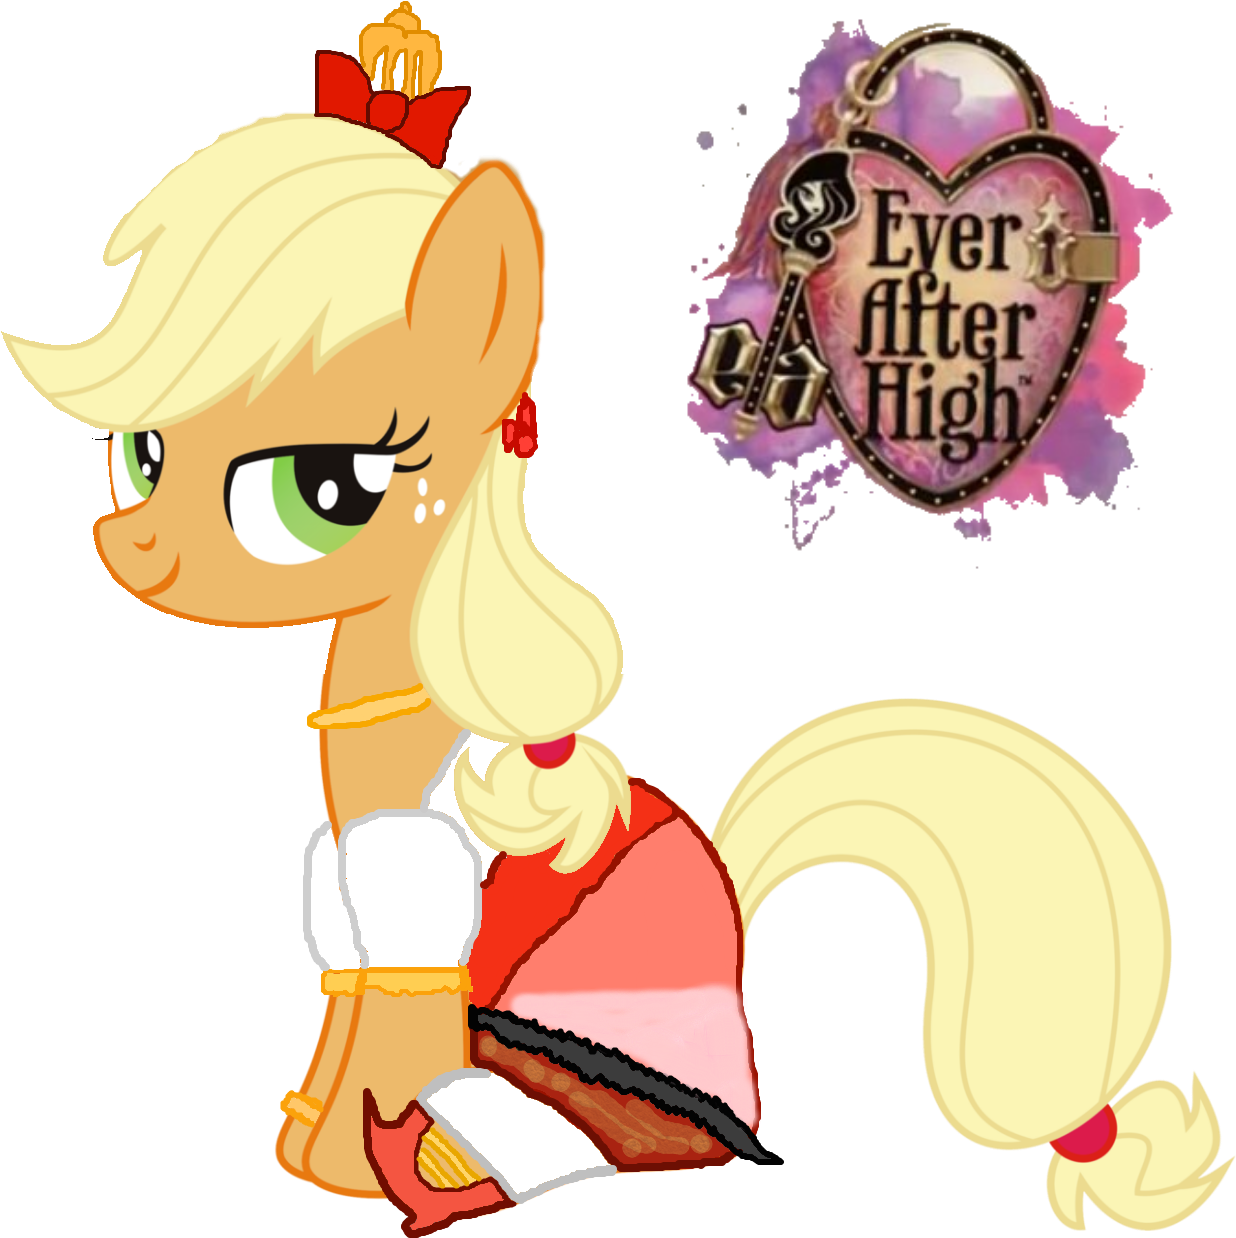 Applejack As Apple White By Thunderfists1988 Applejack - Ever After High / Do You Wonder (1280x1290)